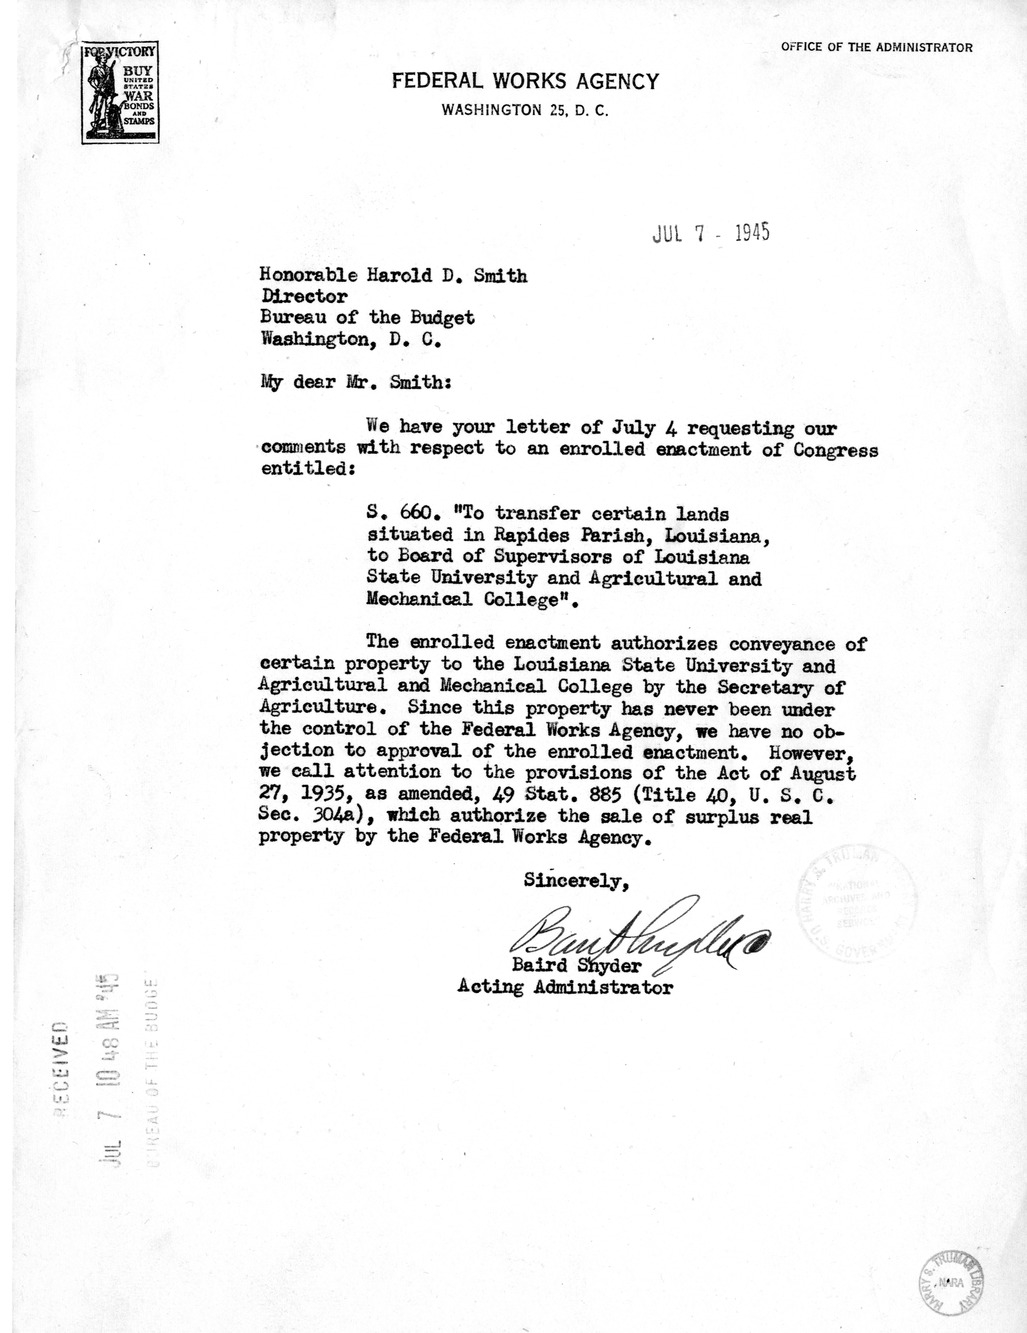 Memorandum from Frederick Bailey to M. C. Latta, S. 660, To Transfer Certain Lands Situated in Rapides Parish, Louisiana, to Board of Supervisors of Louisiana State University and Agricultural and Mechanical College, with Attachments